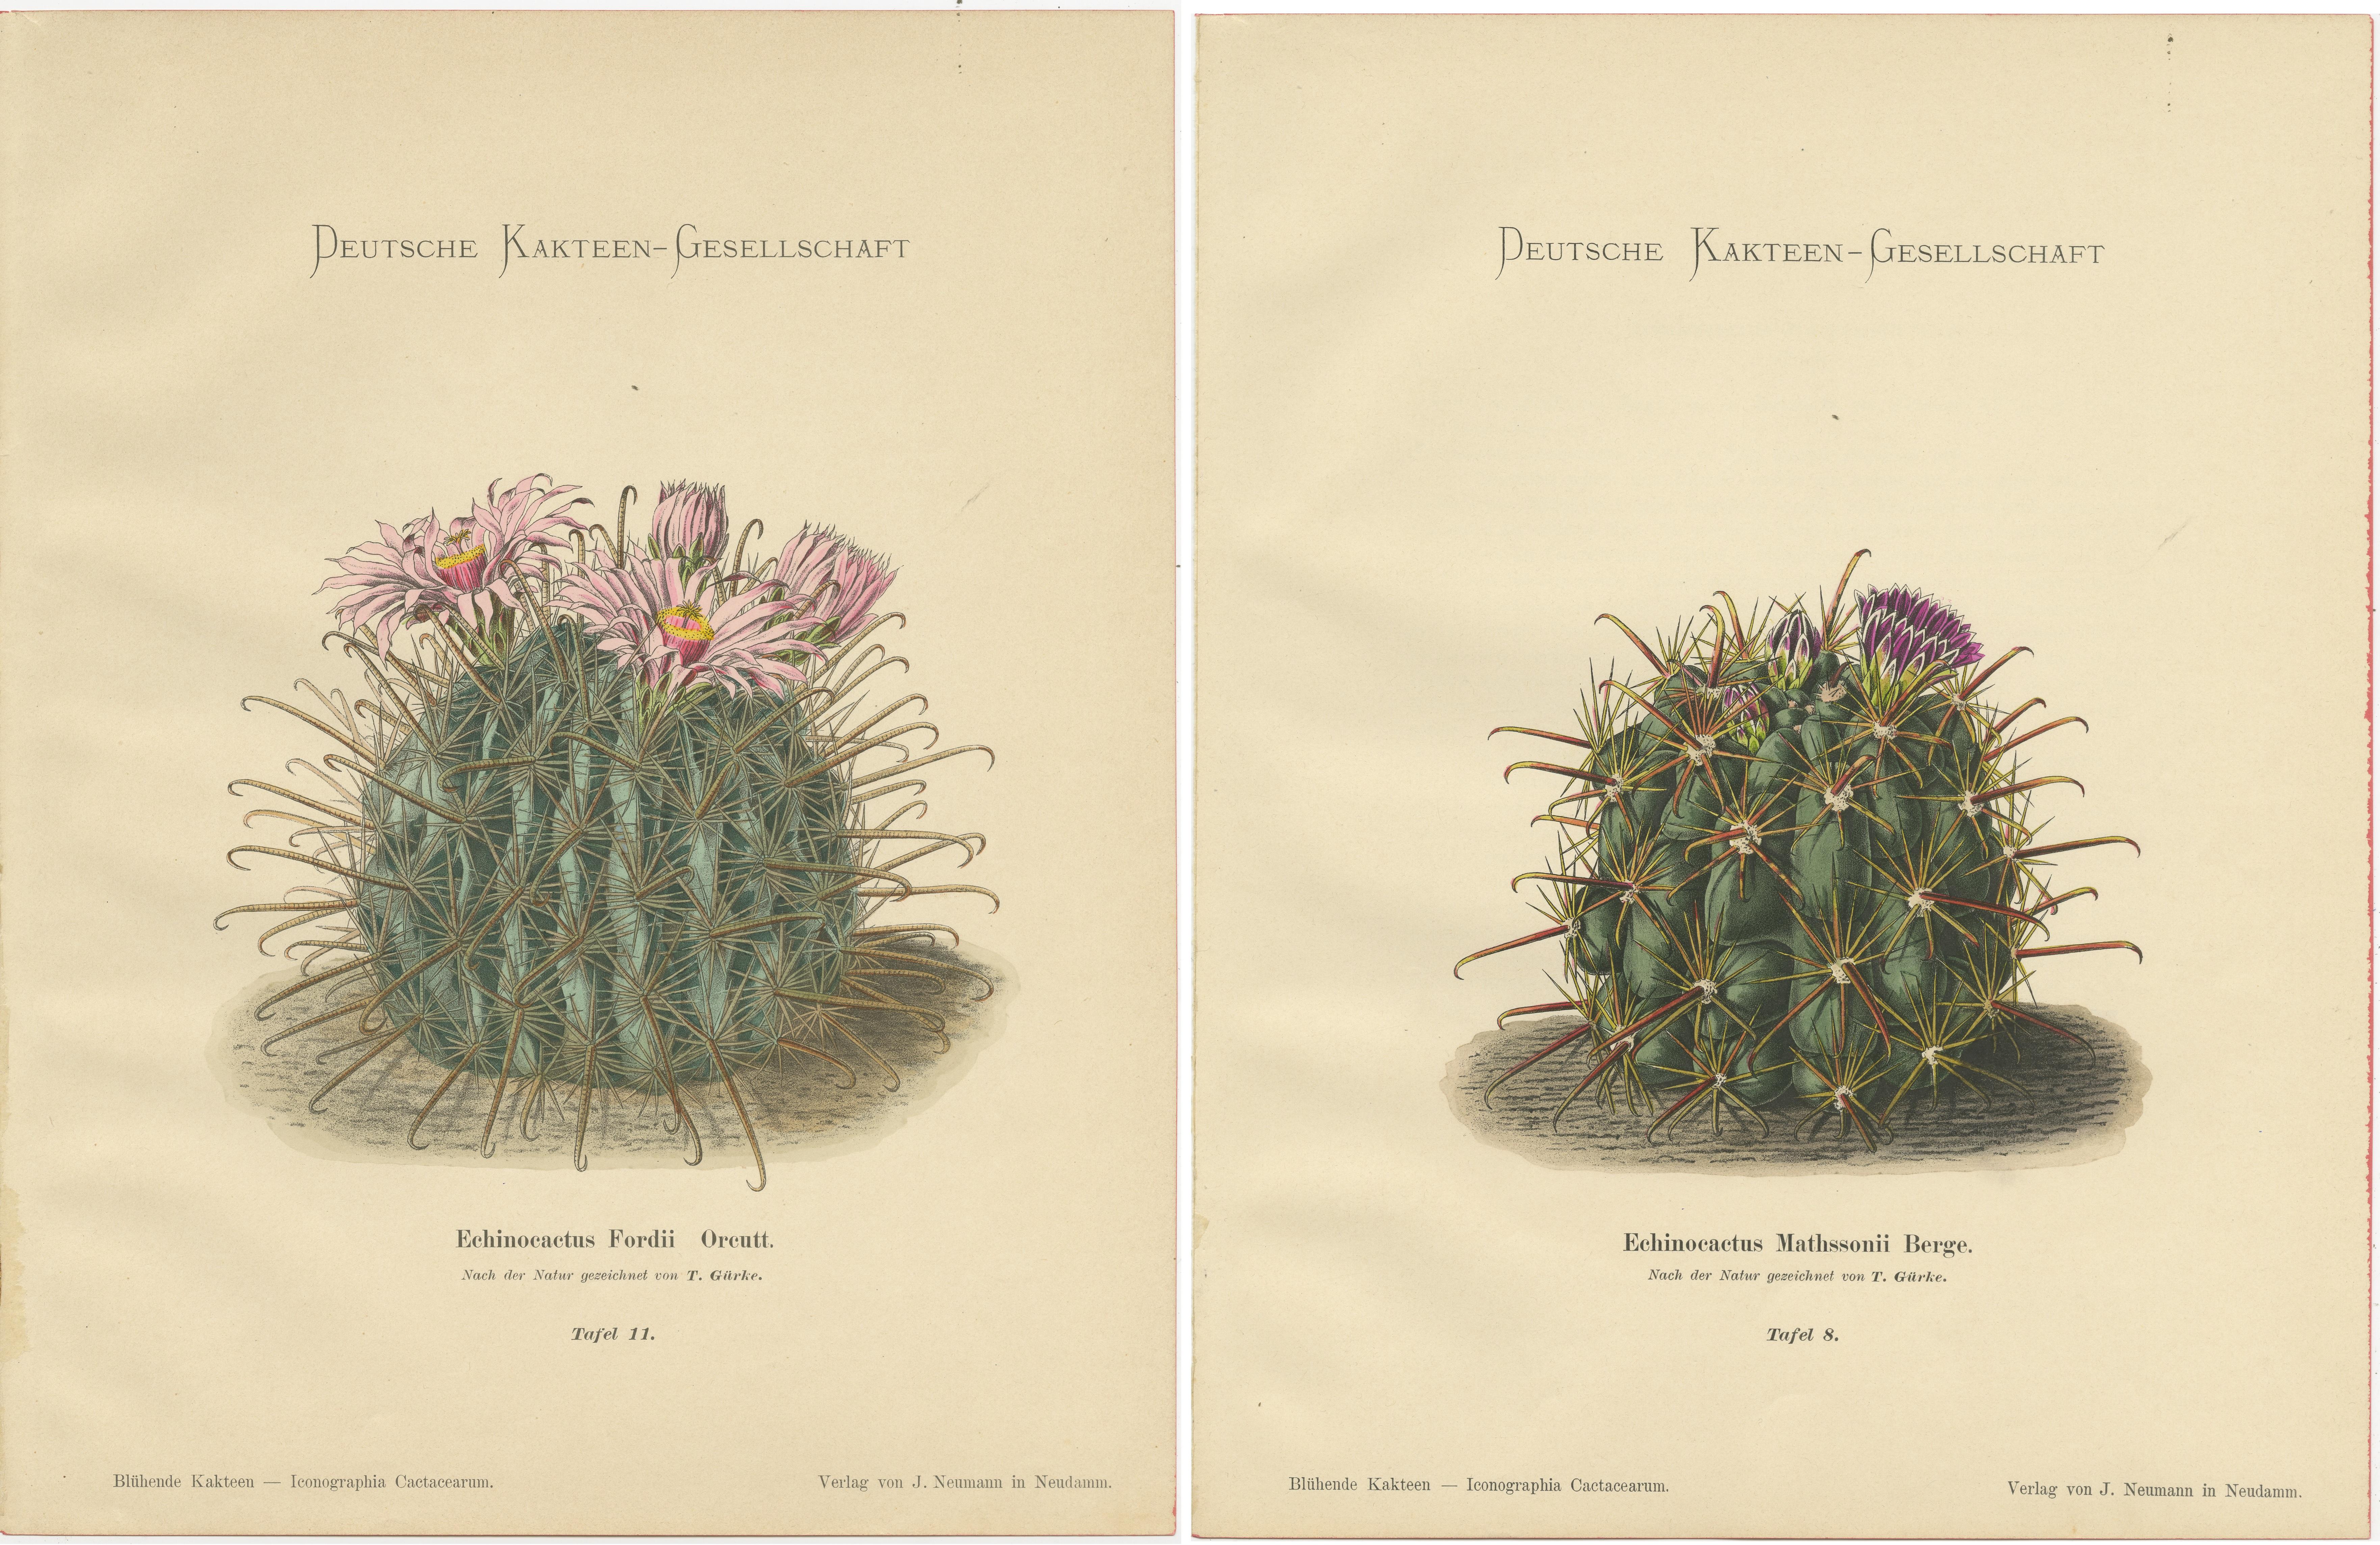 The antique cactus prints, titled 'Echinocactus Fordii Orcutt' and 'Echinocactus Mathssonii Berge,' are part of the work 'Blühende Kakteen' (Flowering Cacti) authored by Karl Schumann and Max Gürke and published between 1900 and 1905.

1.